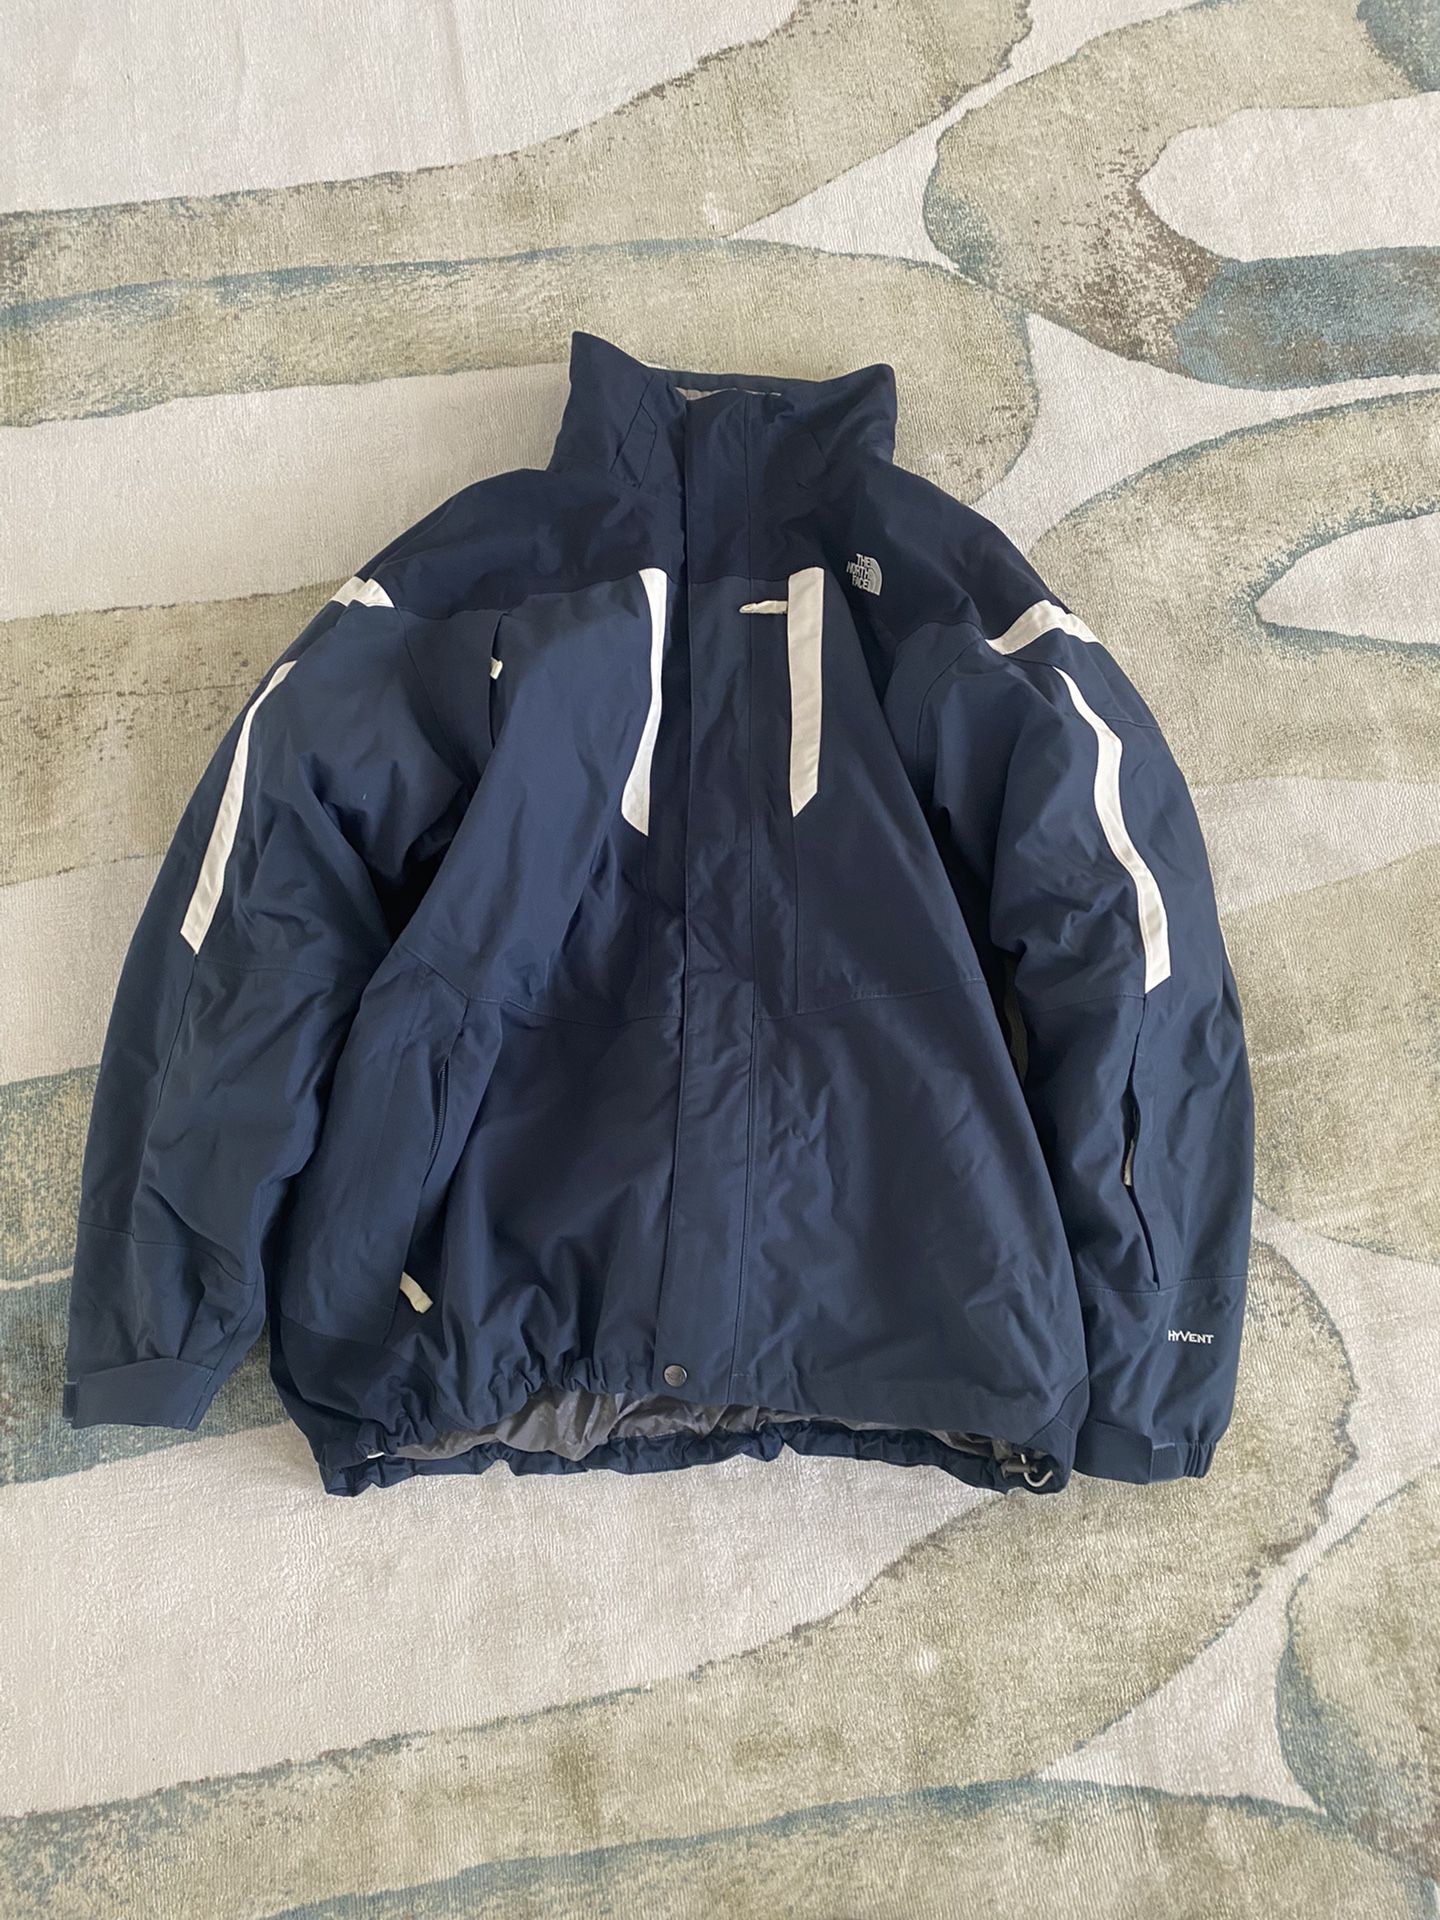 The North Face Hyvent Triclimate Jacket Waterproof Ski Snow Coat Blue Size XXL. Great condition, make an offer!